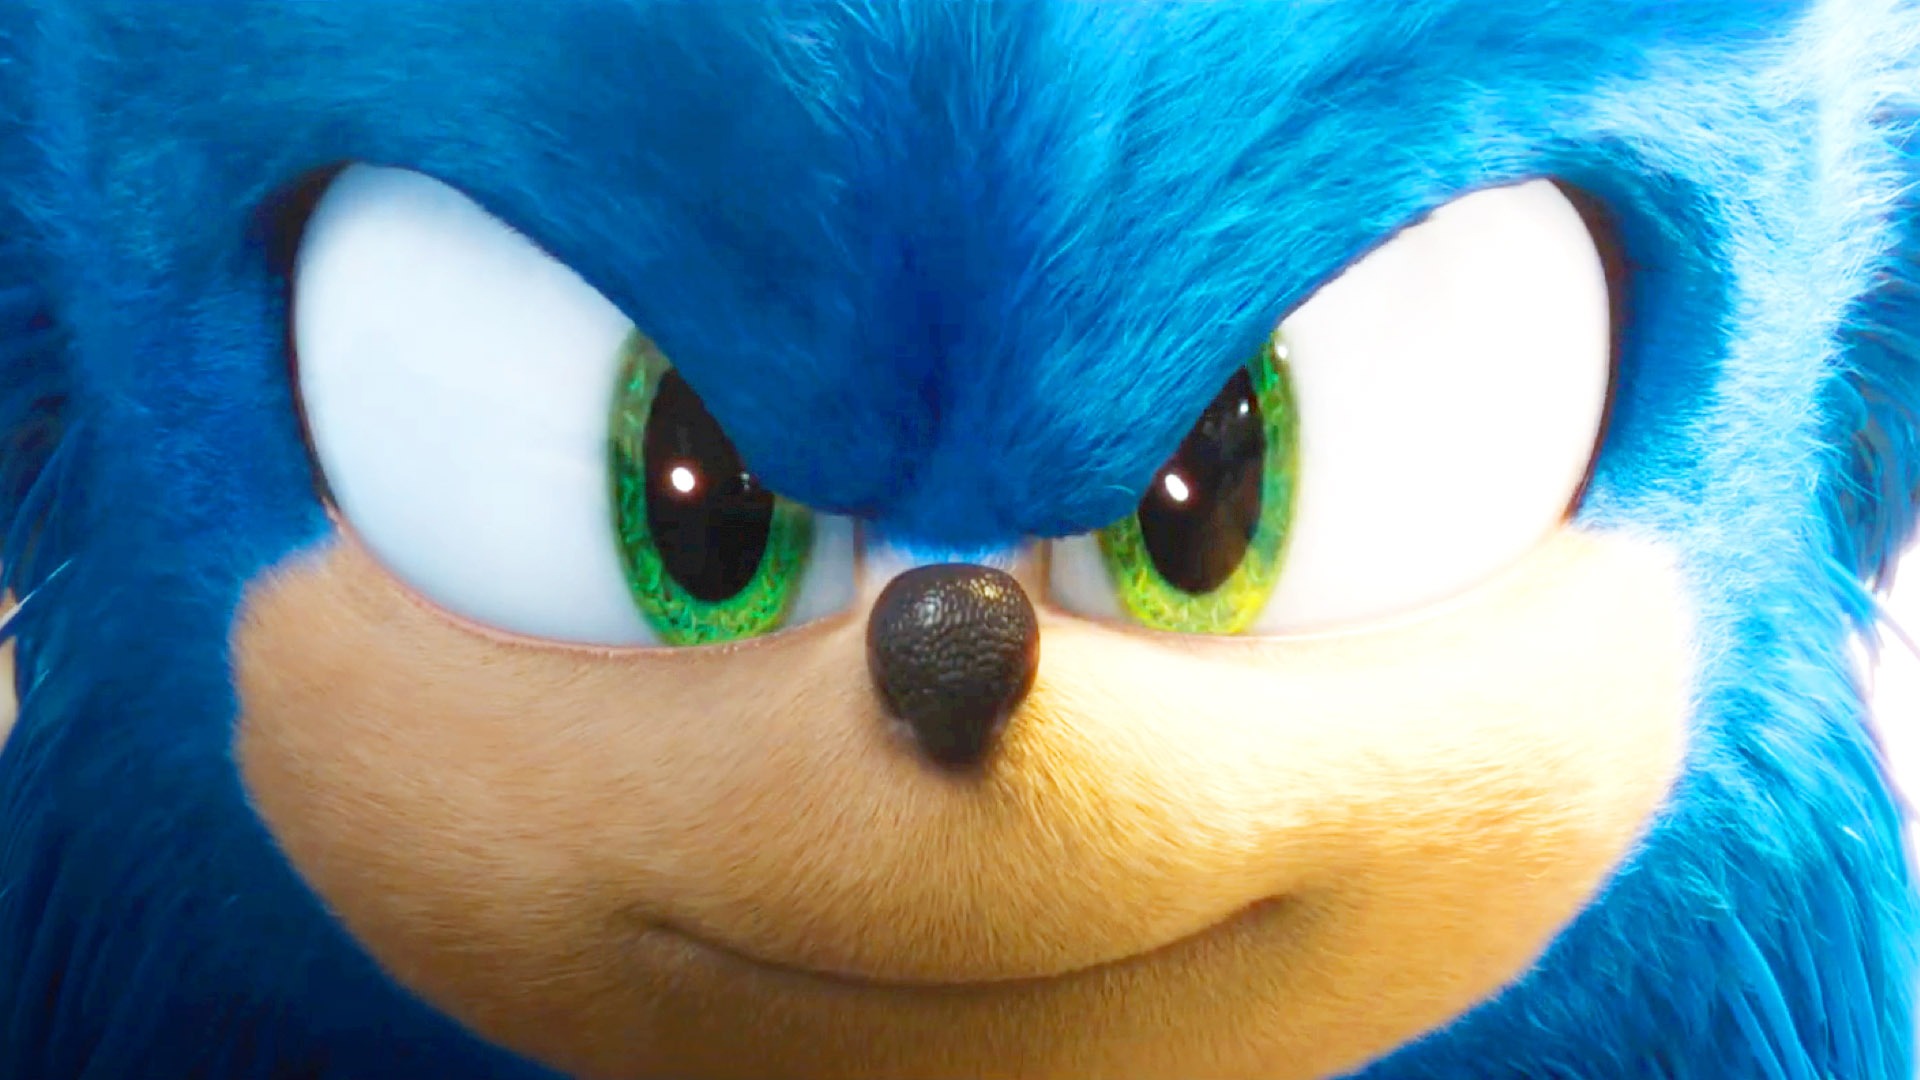 Sonic Prime - Trailers & Videos - Rotten Tomatoes